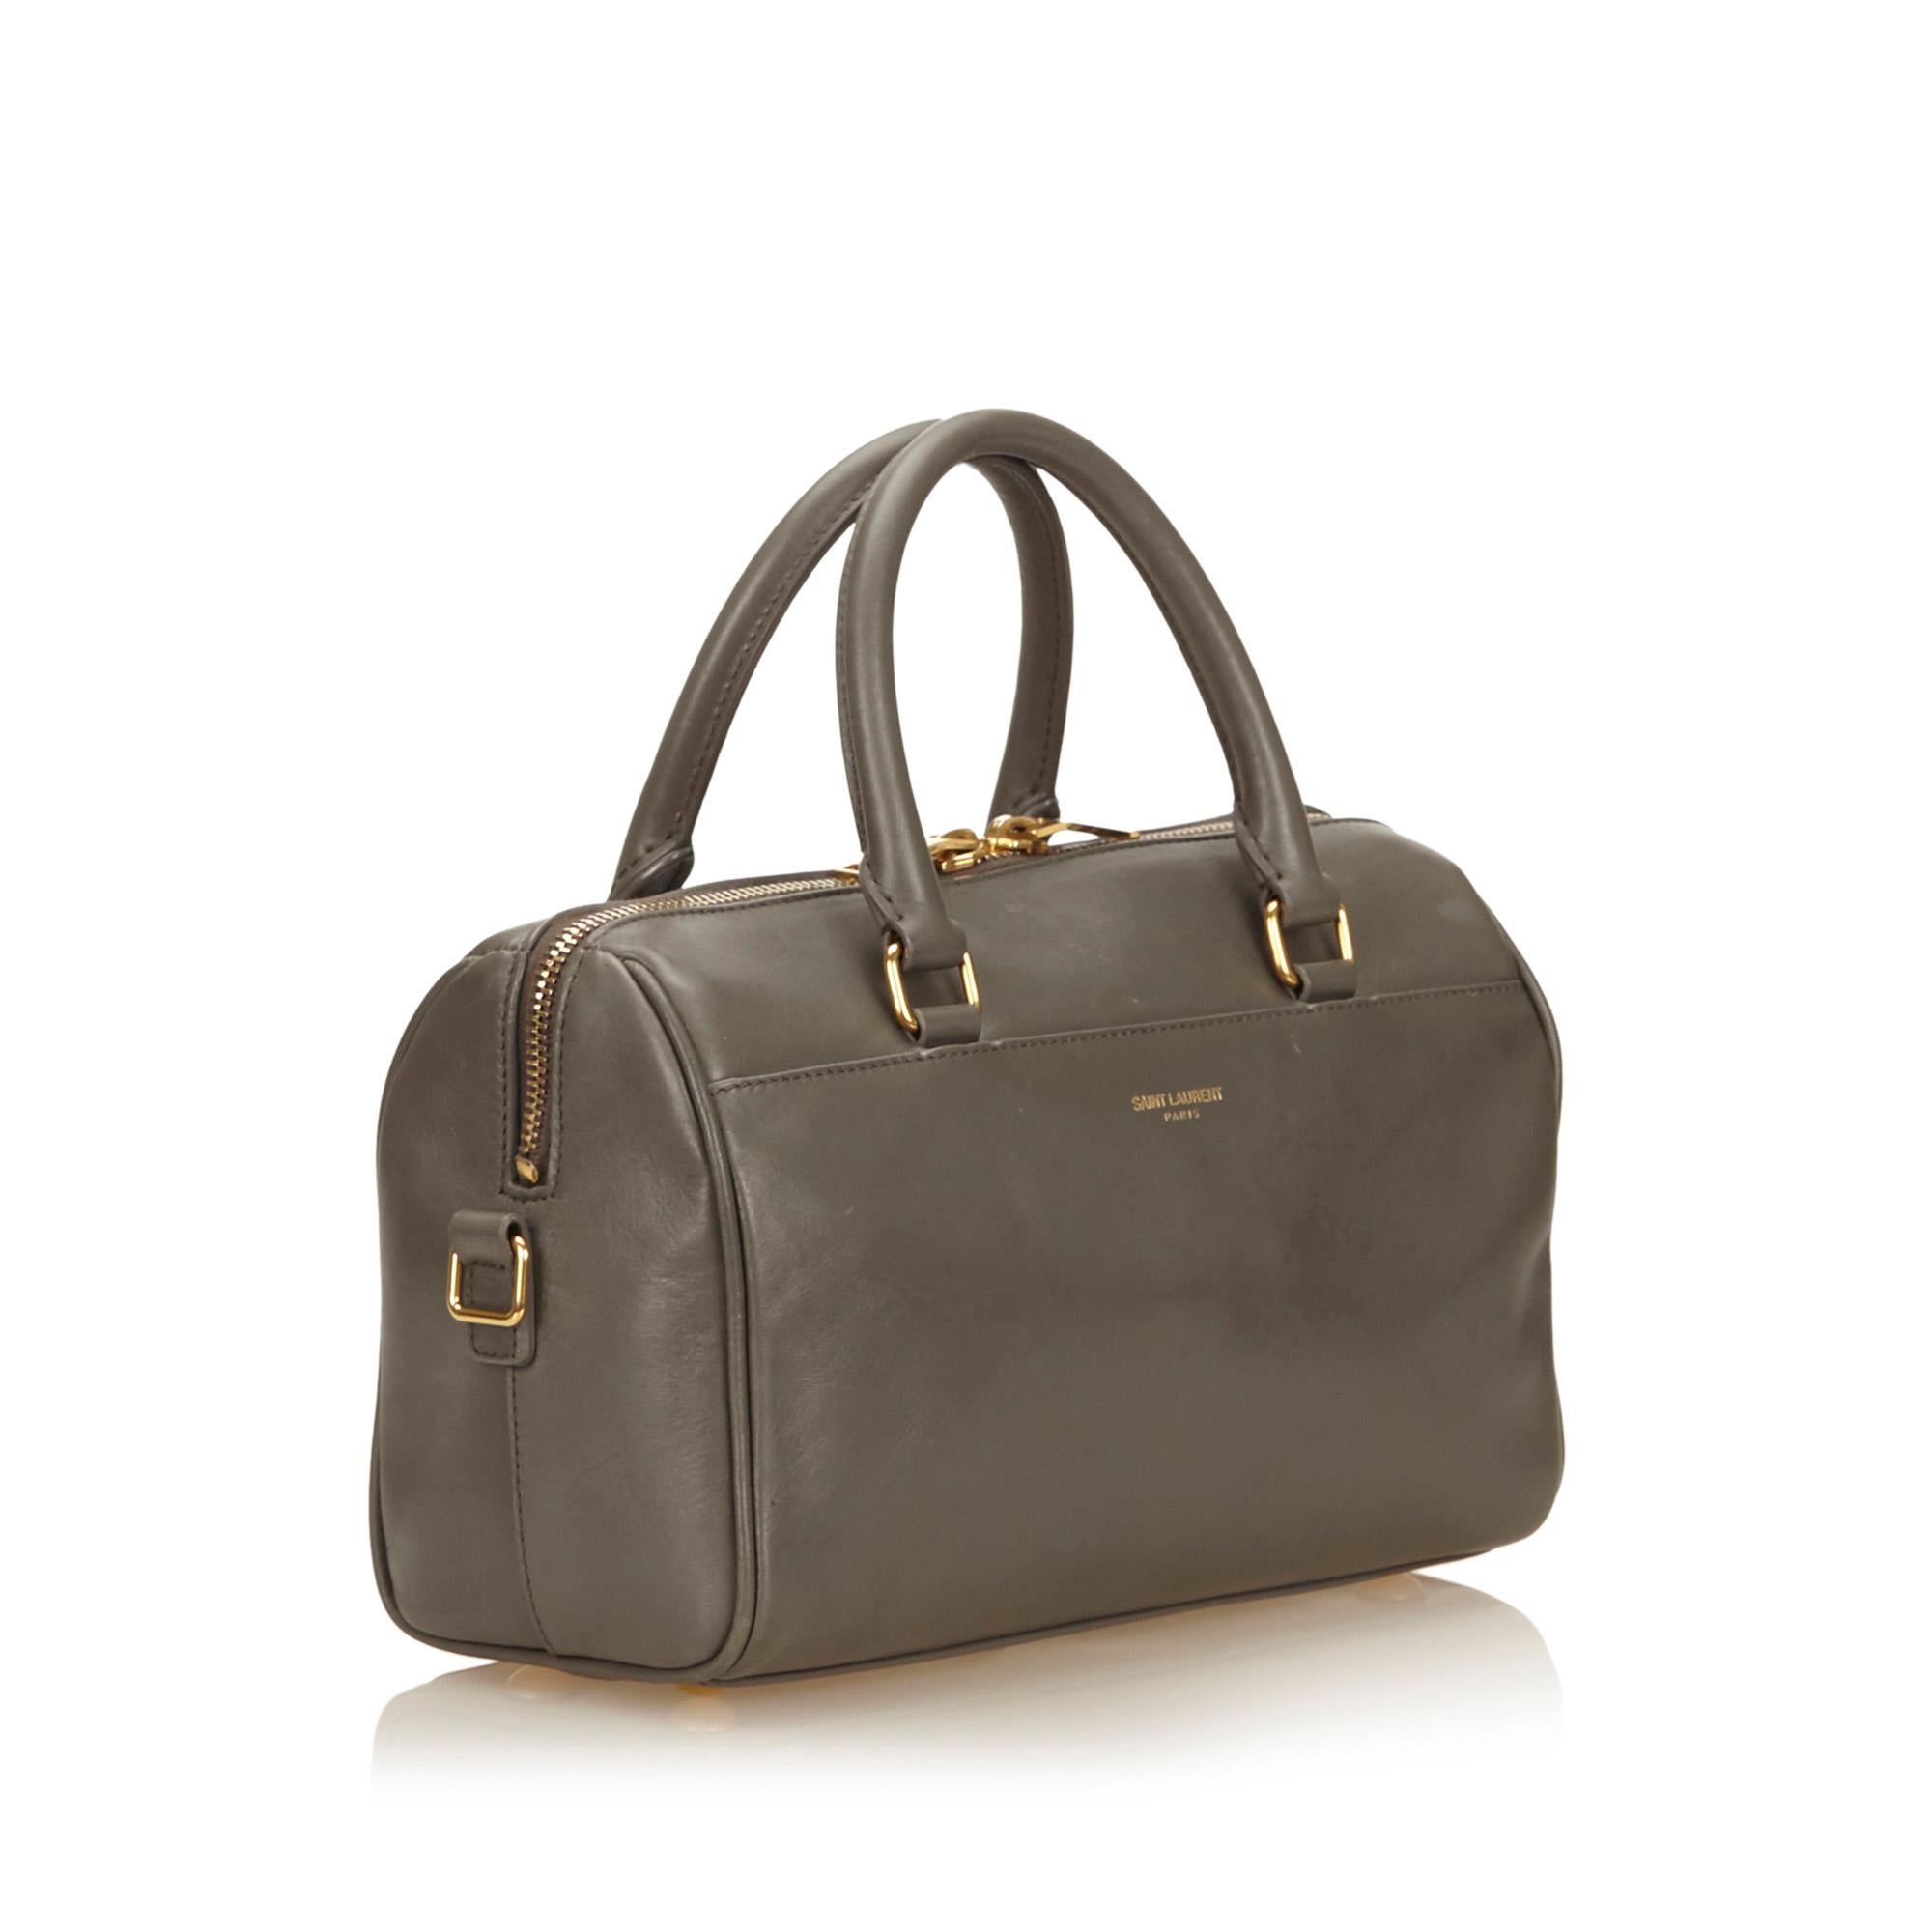 The Classic Duffel 6 features a leather body, an adjustable shoulder strap, a rolled leather handle, a top zip closure, and an interior slip pocket. It carries as B condition rating.

Inclusions: 
This item does not come with